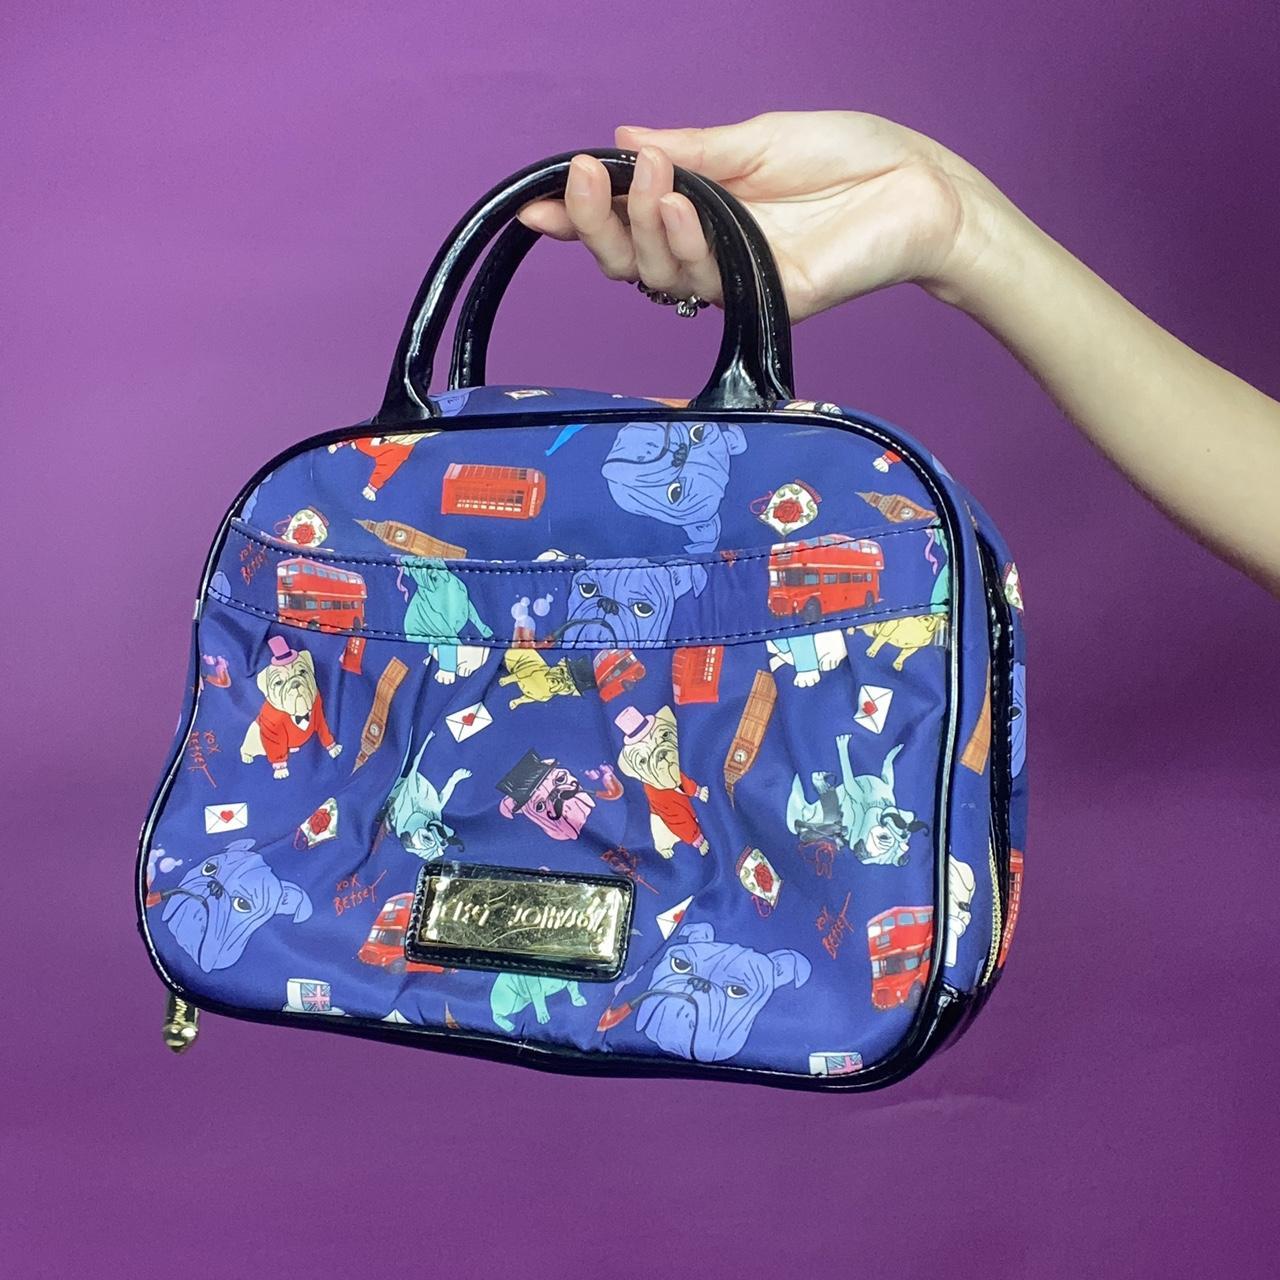 Product Image 1 - cyber y2k dog print purse

from